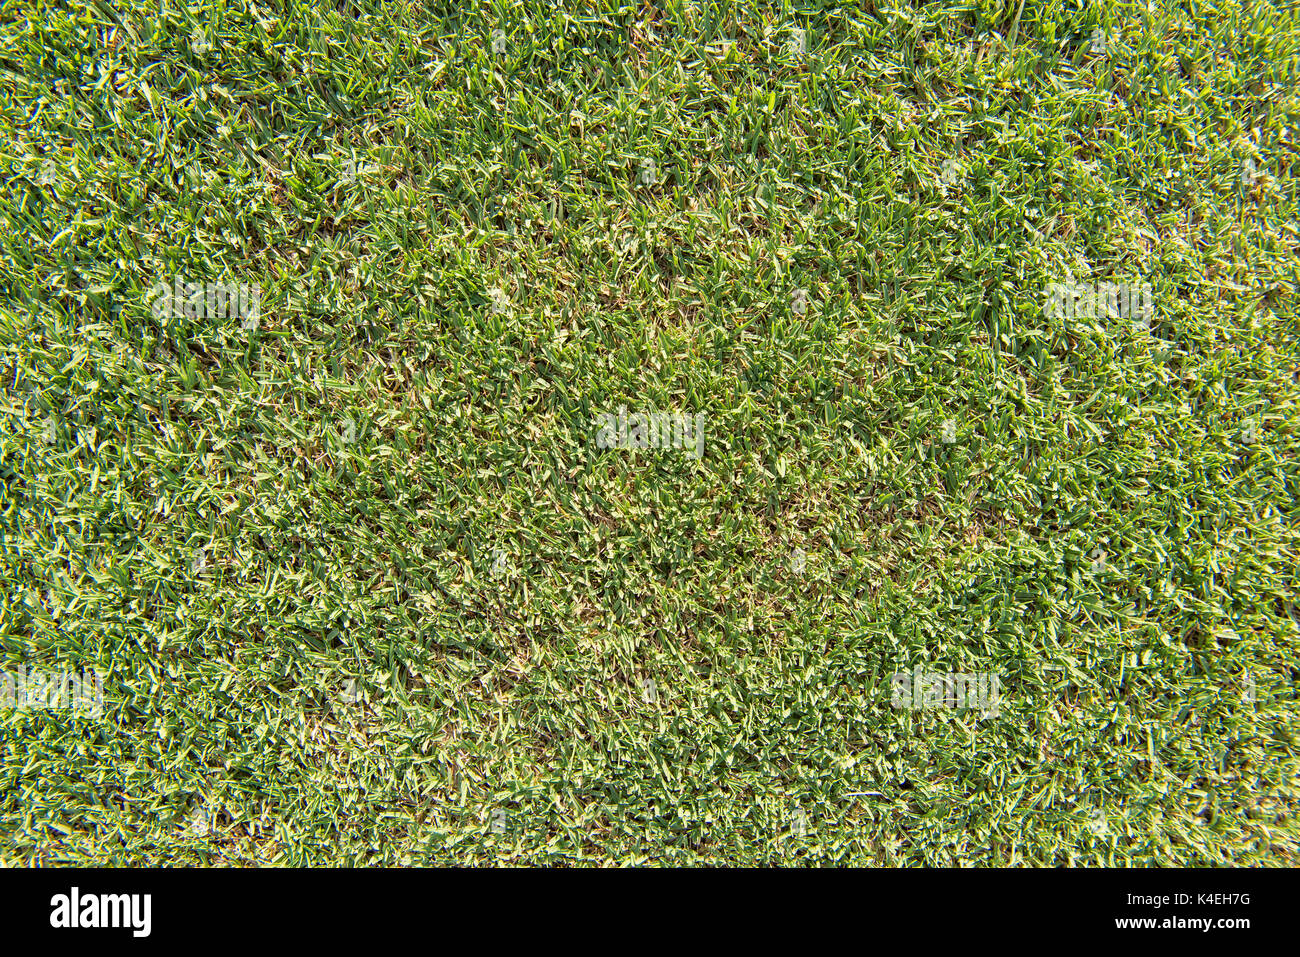 Smooth green grass soccer or golf field background. Stock Photo